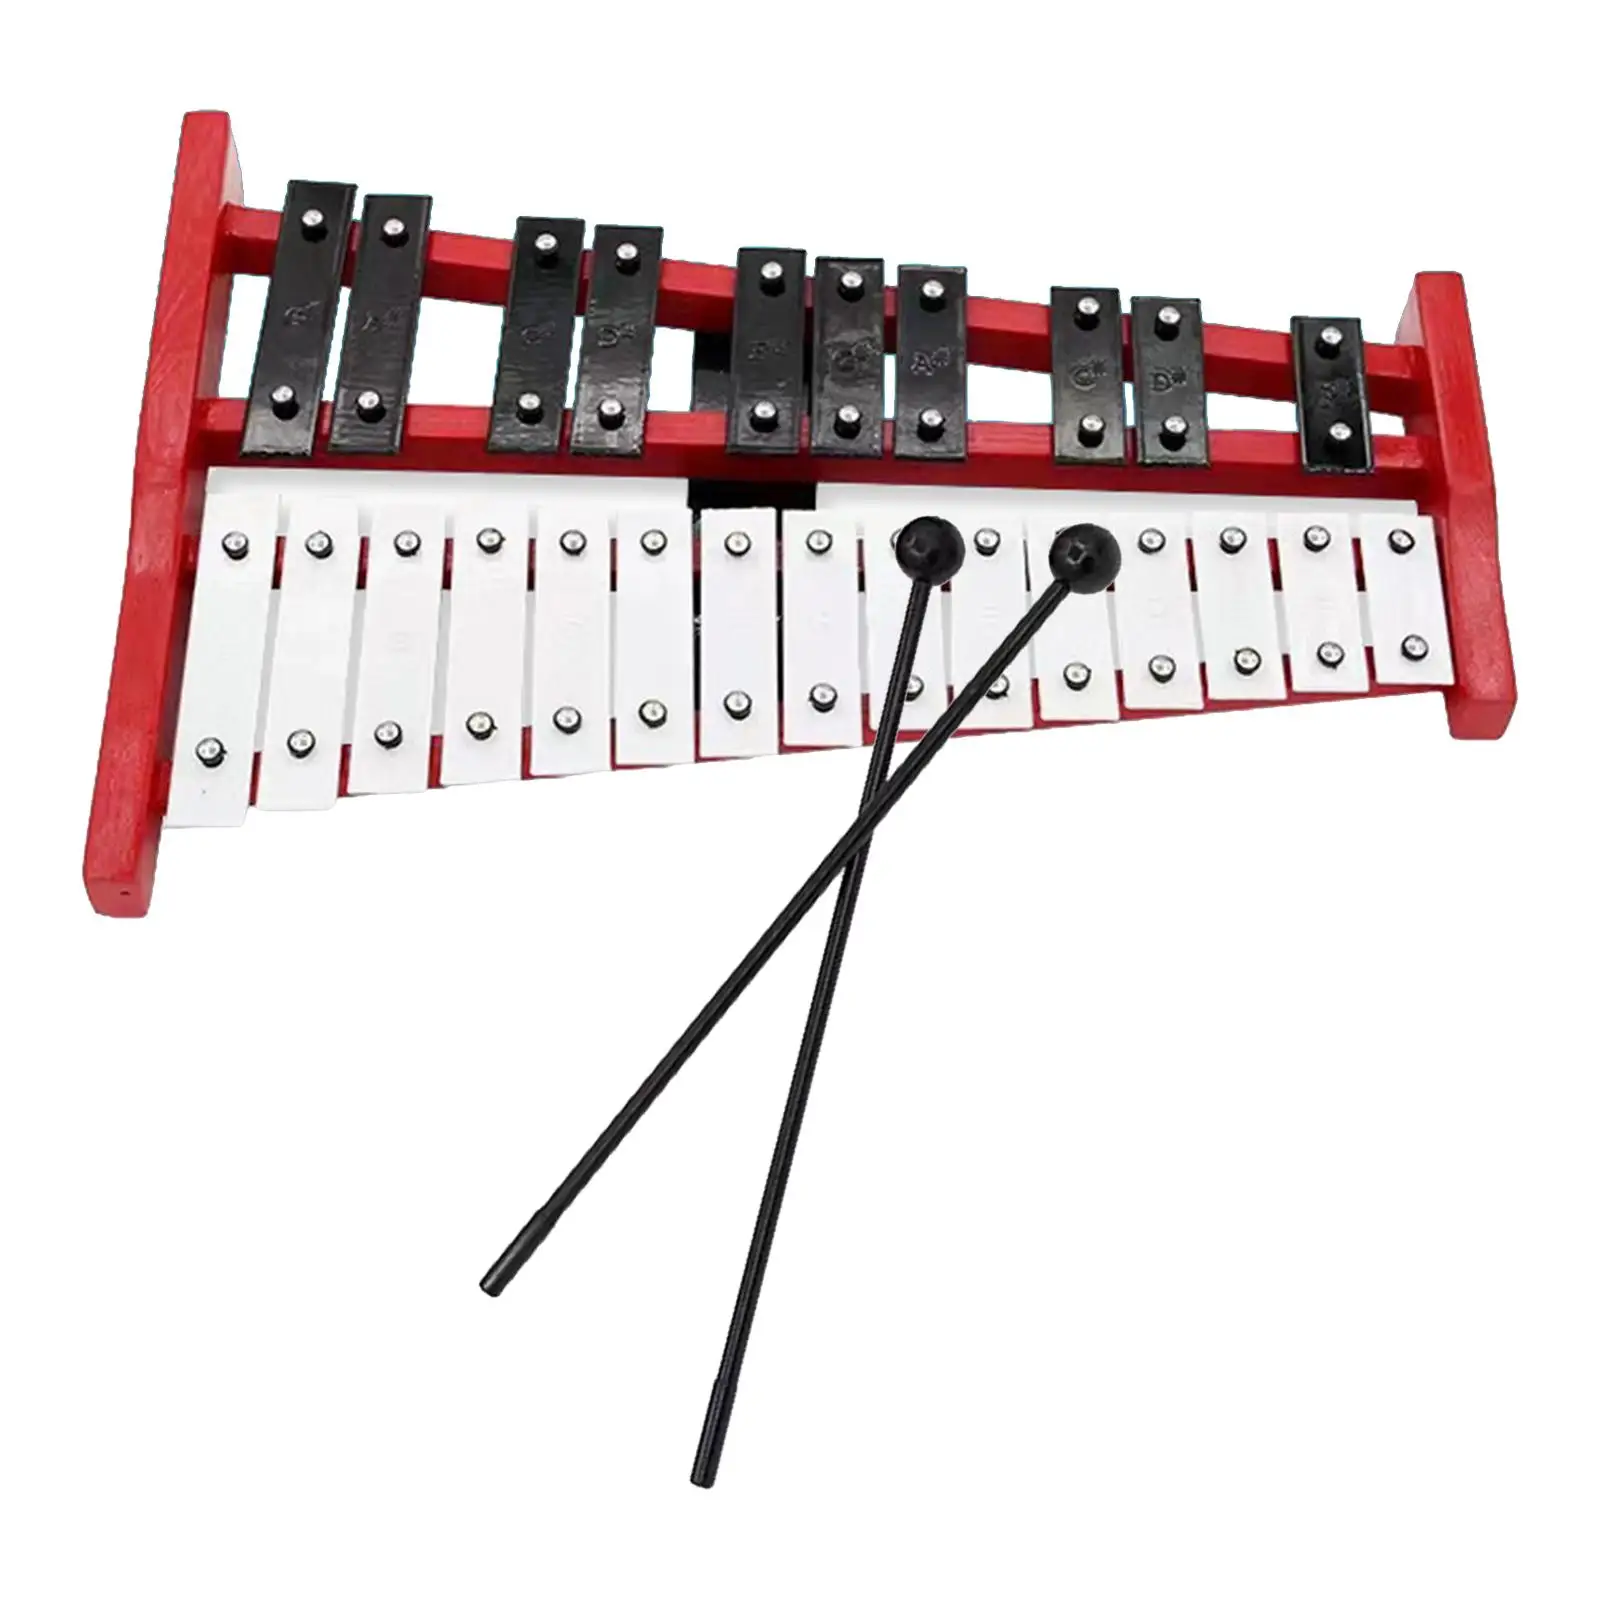 Musical Xylophone Percussion Instrument for Concert Live Performance Outside